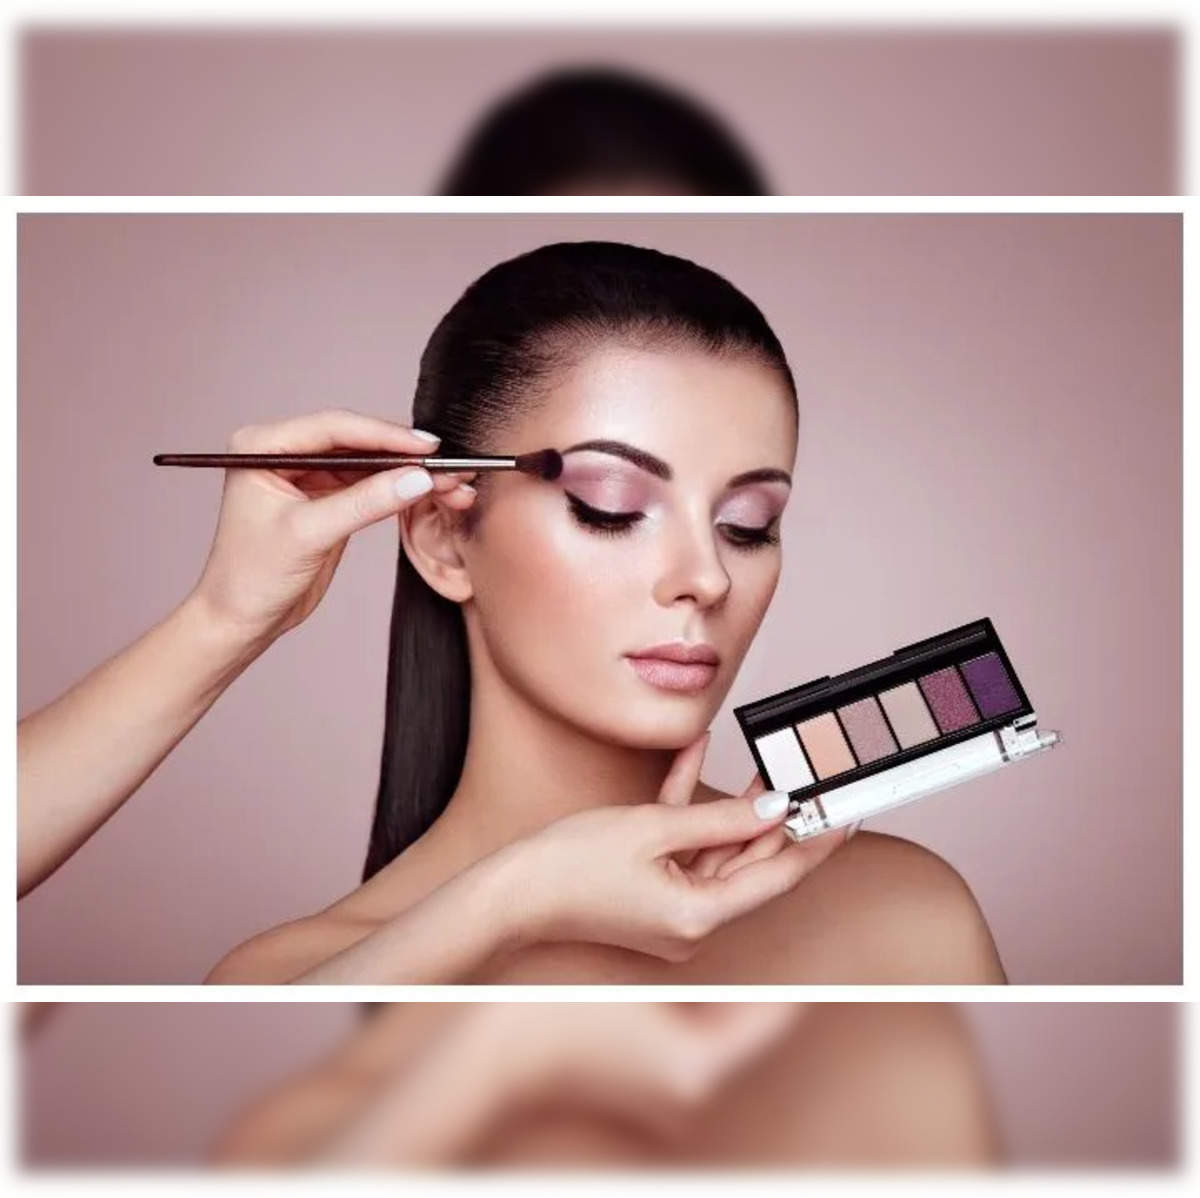 eyeshadow palette for women: 10 eyeshadow palettes for women under Rs.800 -  The Economic Times